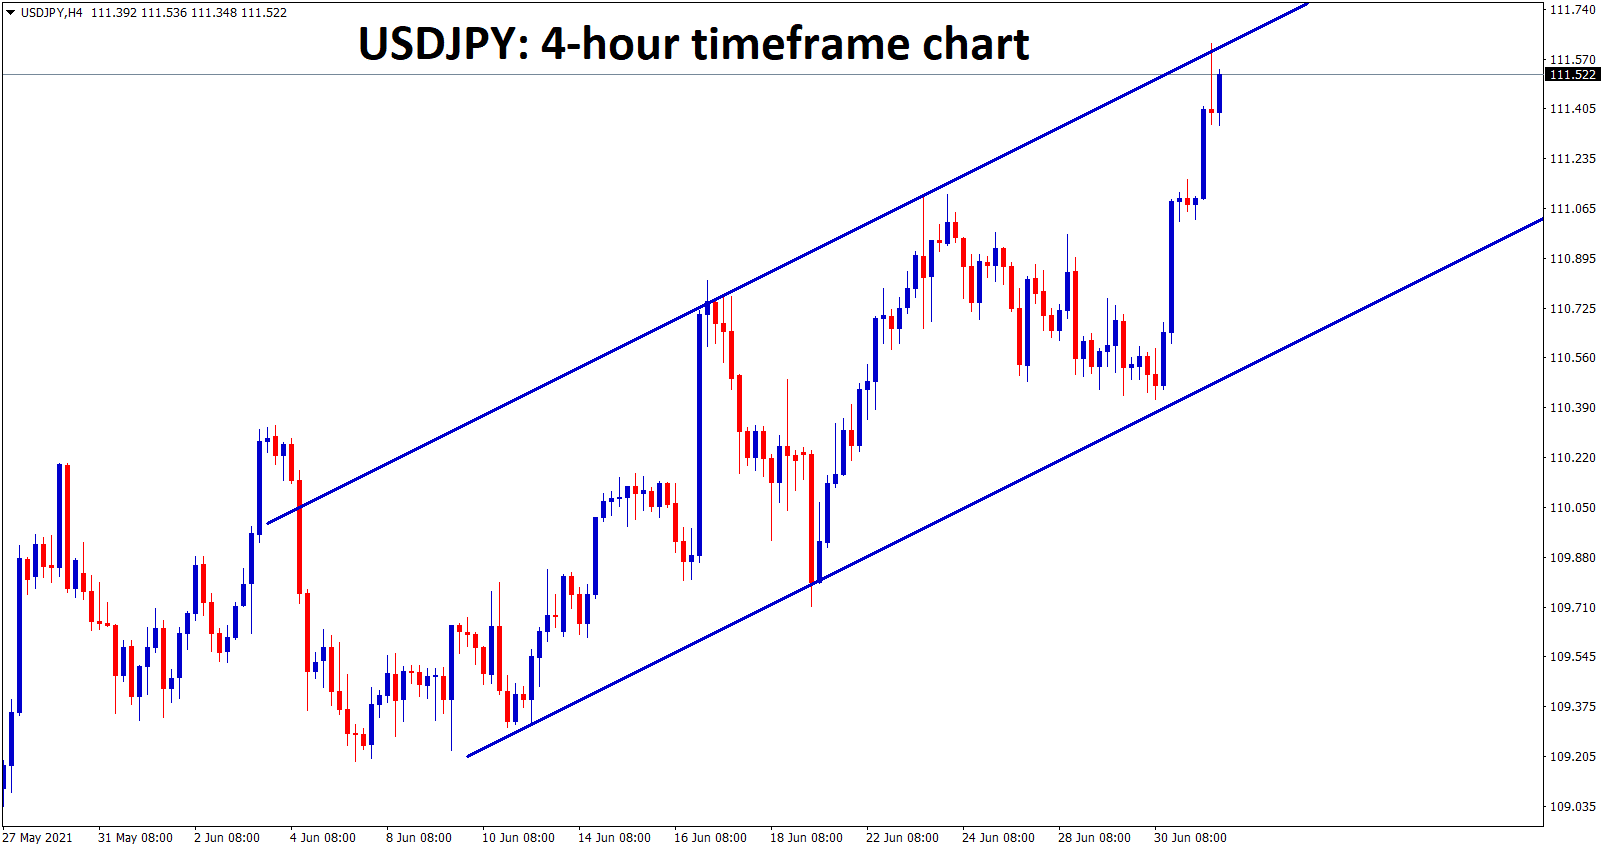 USDJPY hits the higher high zone of the Ascending Channel